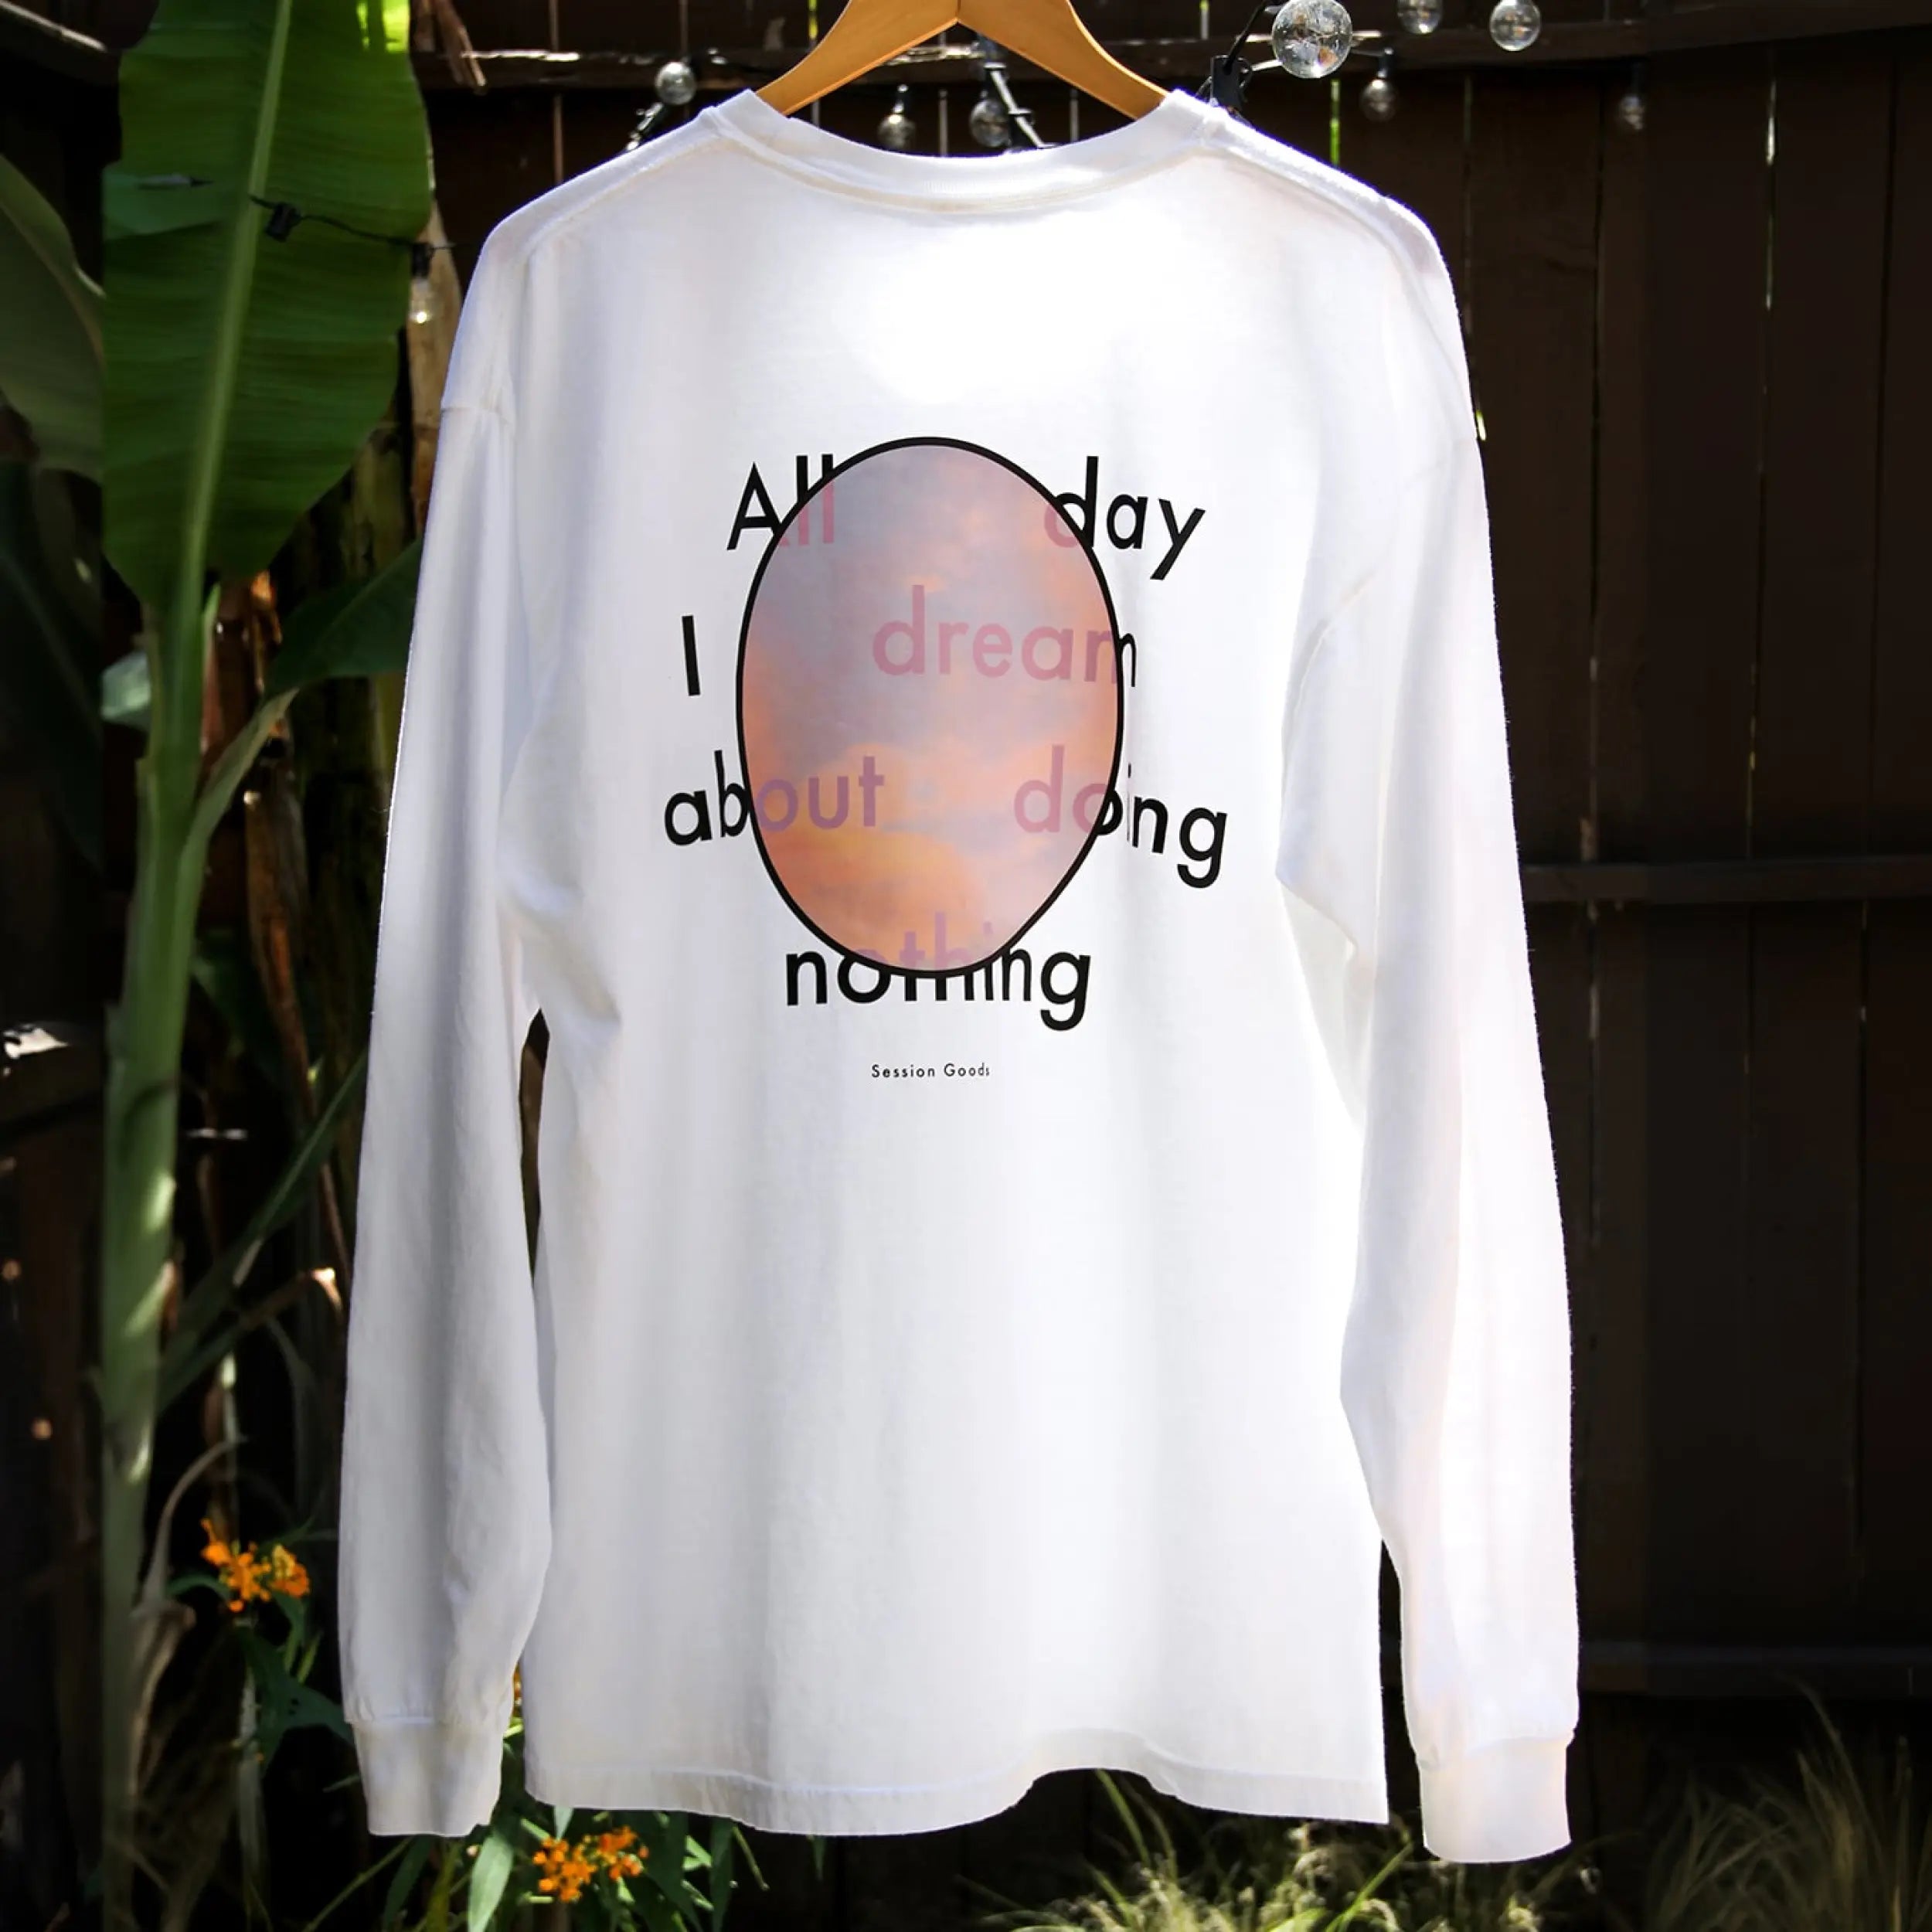 Cozy vibes: Relax in our 'All Day I Dream About Doing Nothing' long sleeve tee.